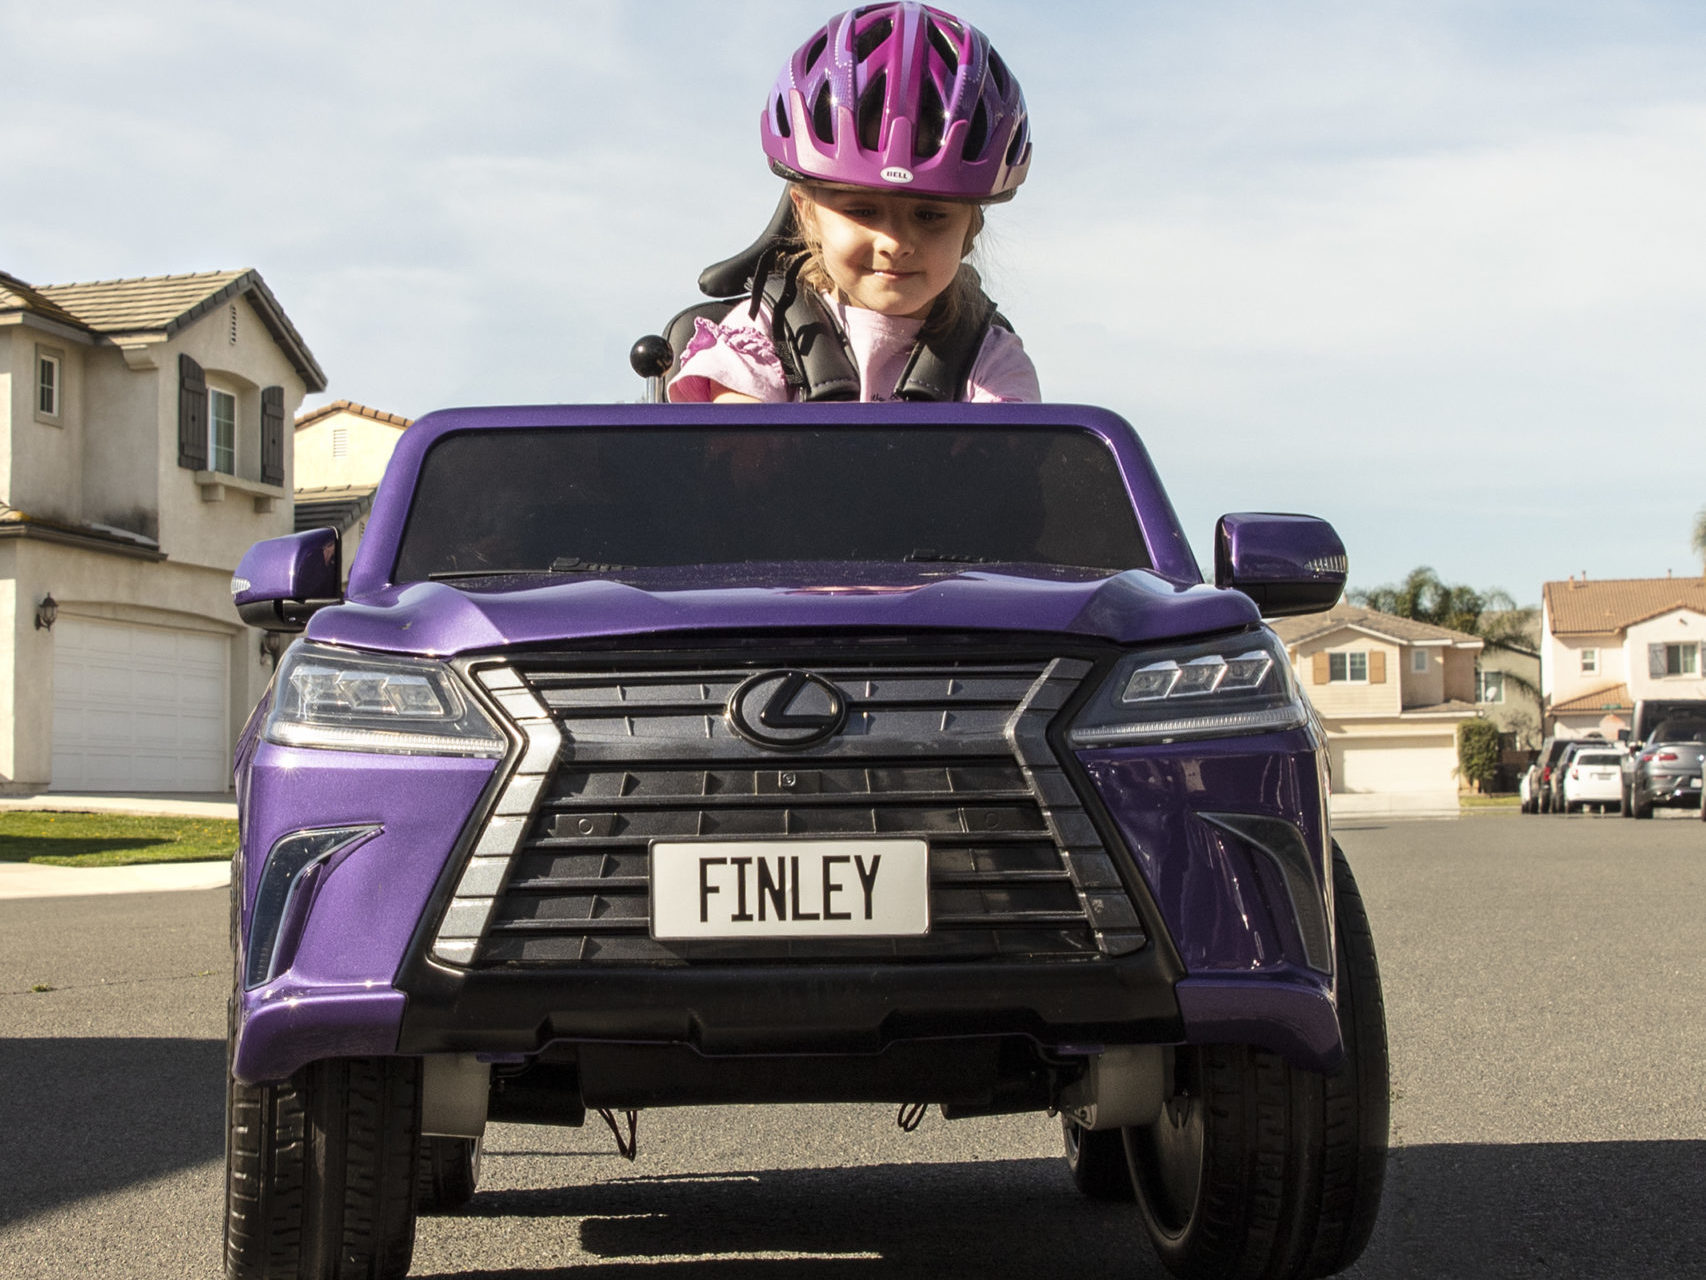 Lexus Promotes Cause of Cerebral Palsy with Toy Version of Convertible SUV